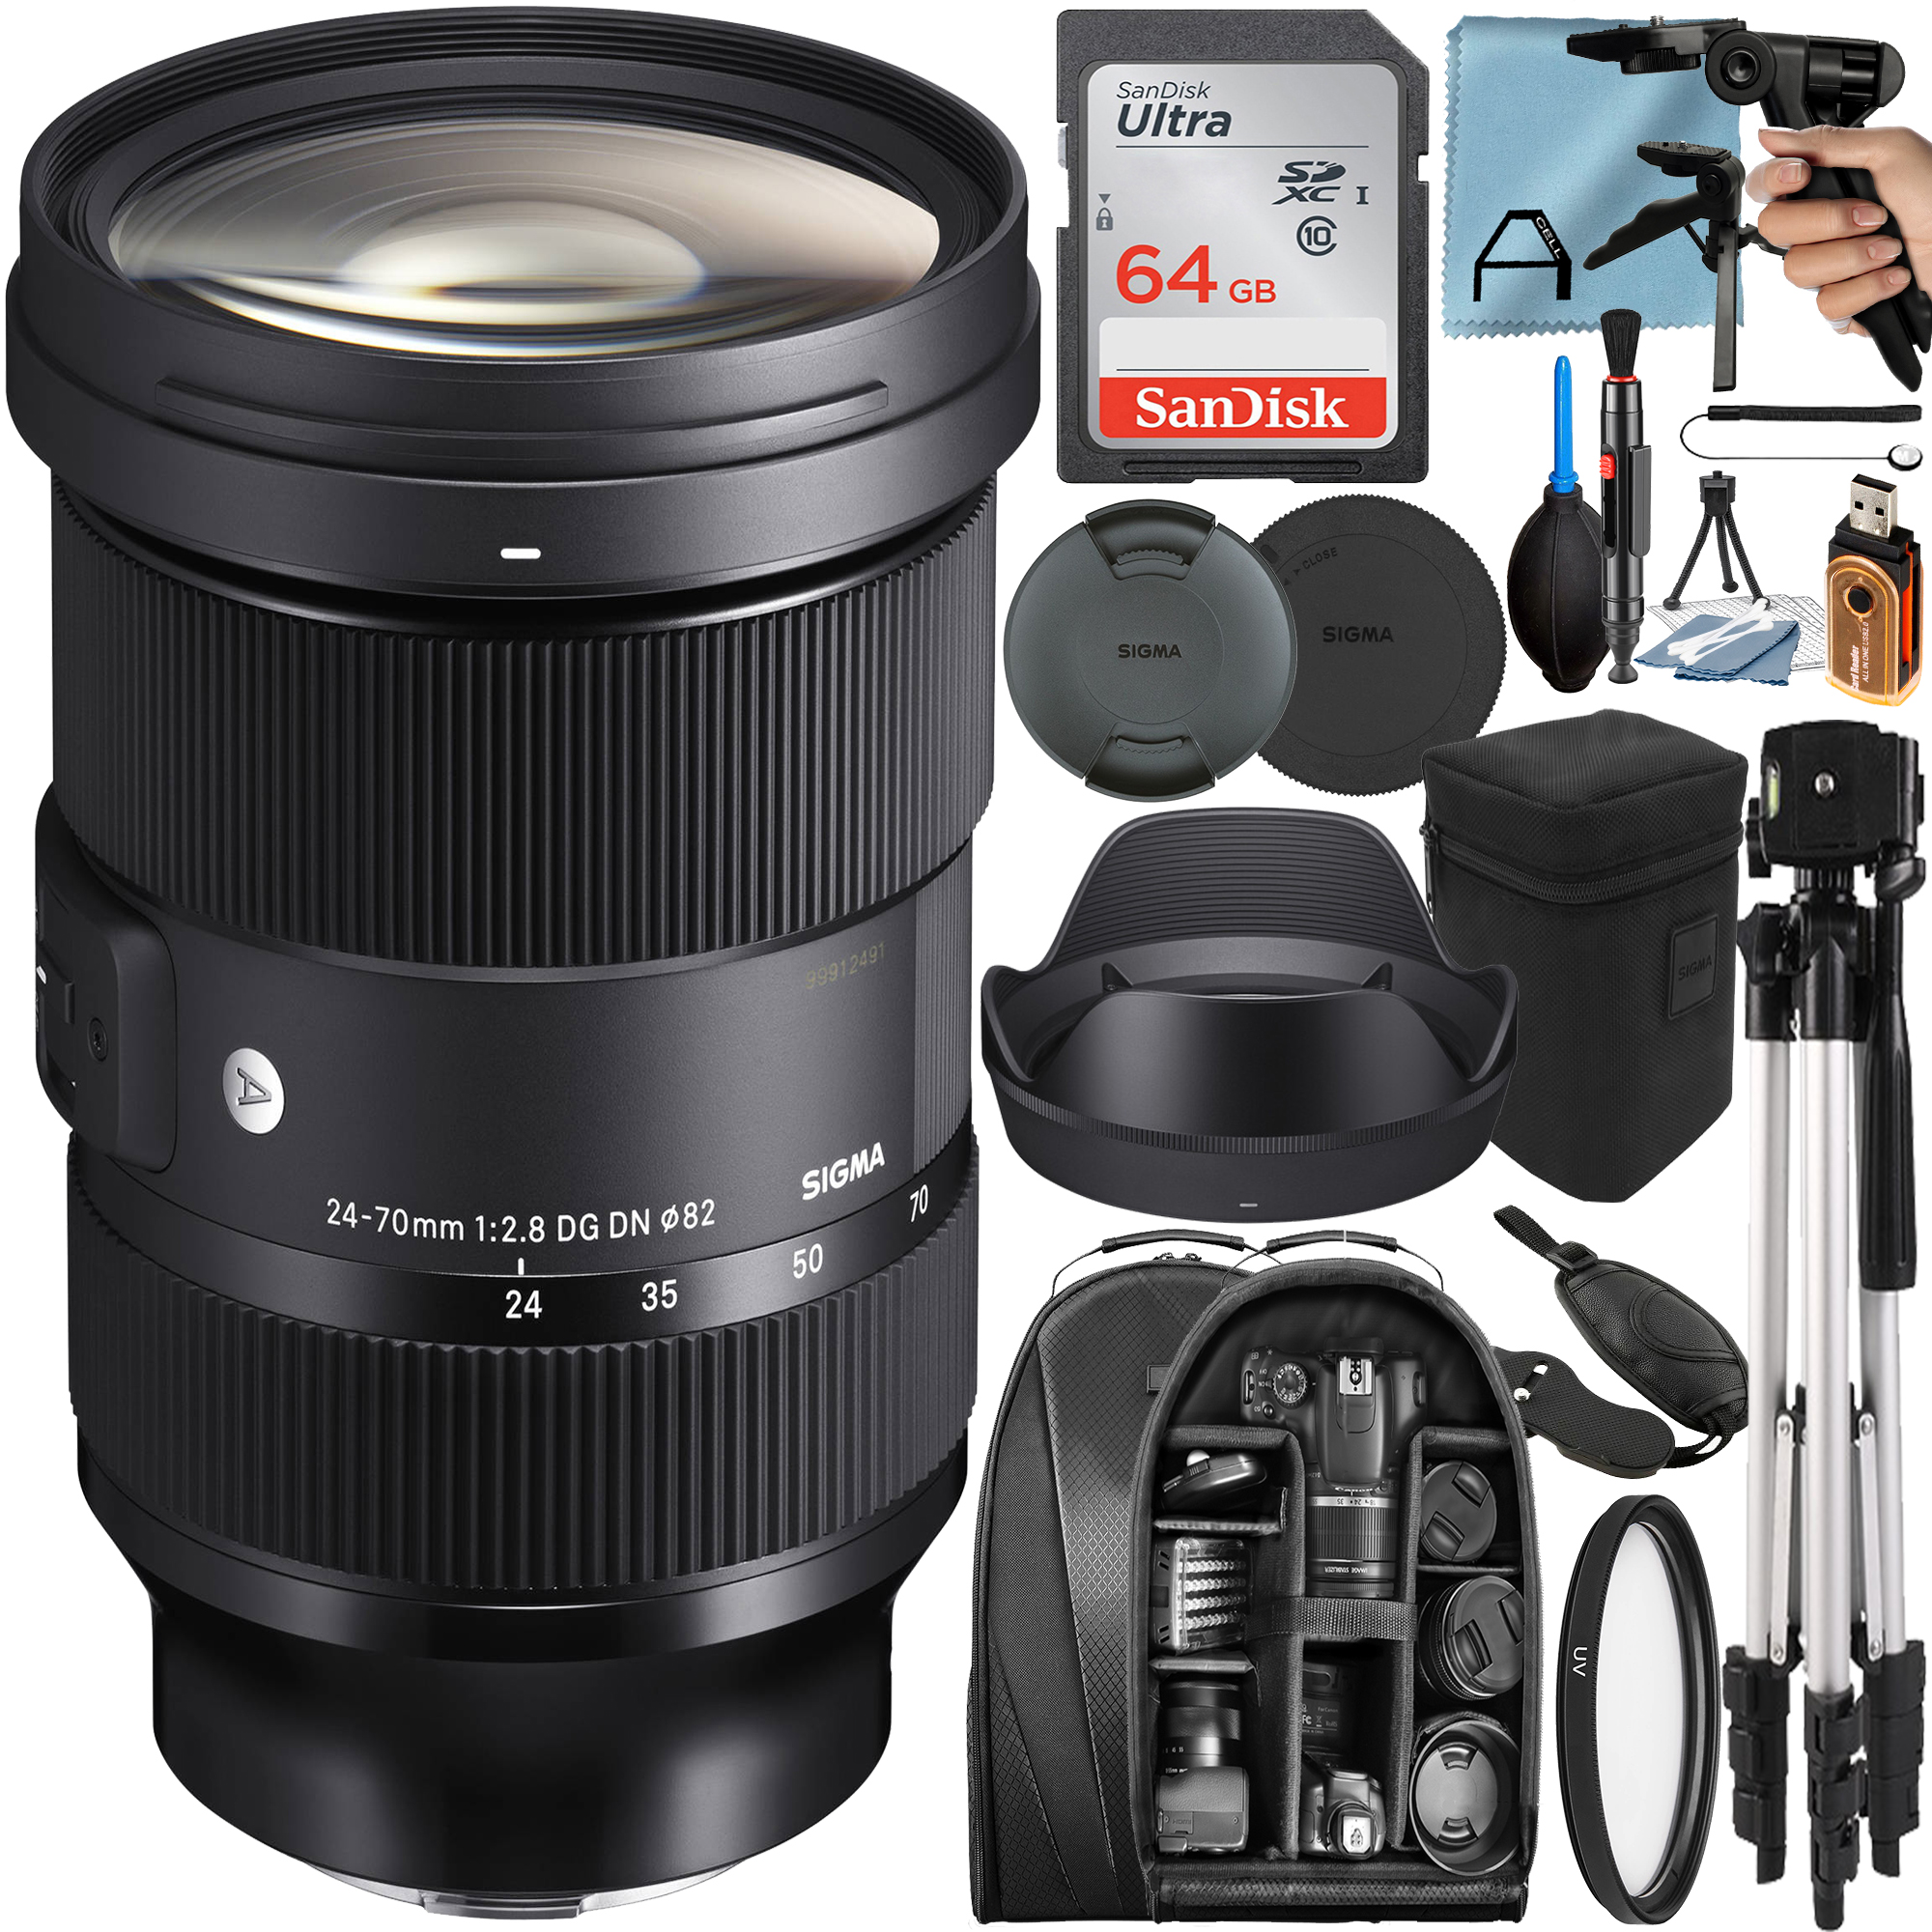 Sigma 24-70mm F/2.8 DG DN Art Lens for Sony E with 64GB SanDisk Memory Card + Tripod + Backpack + A-Cell Accessory Bundle